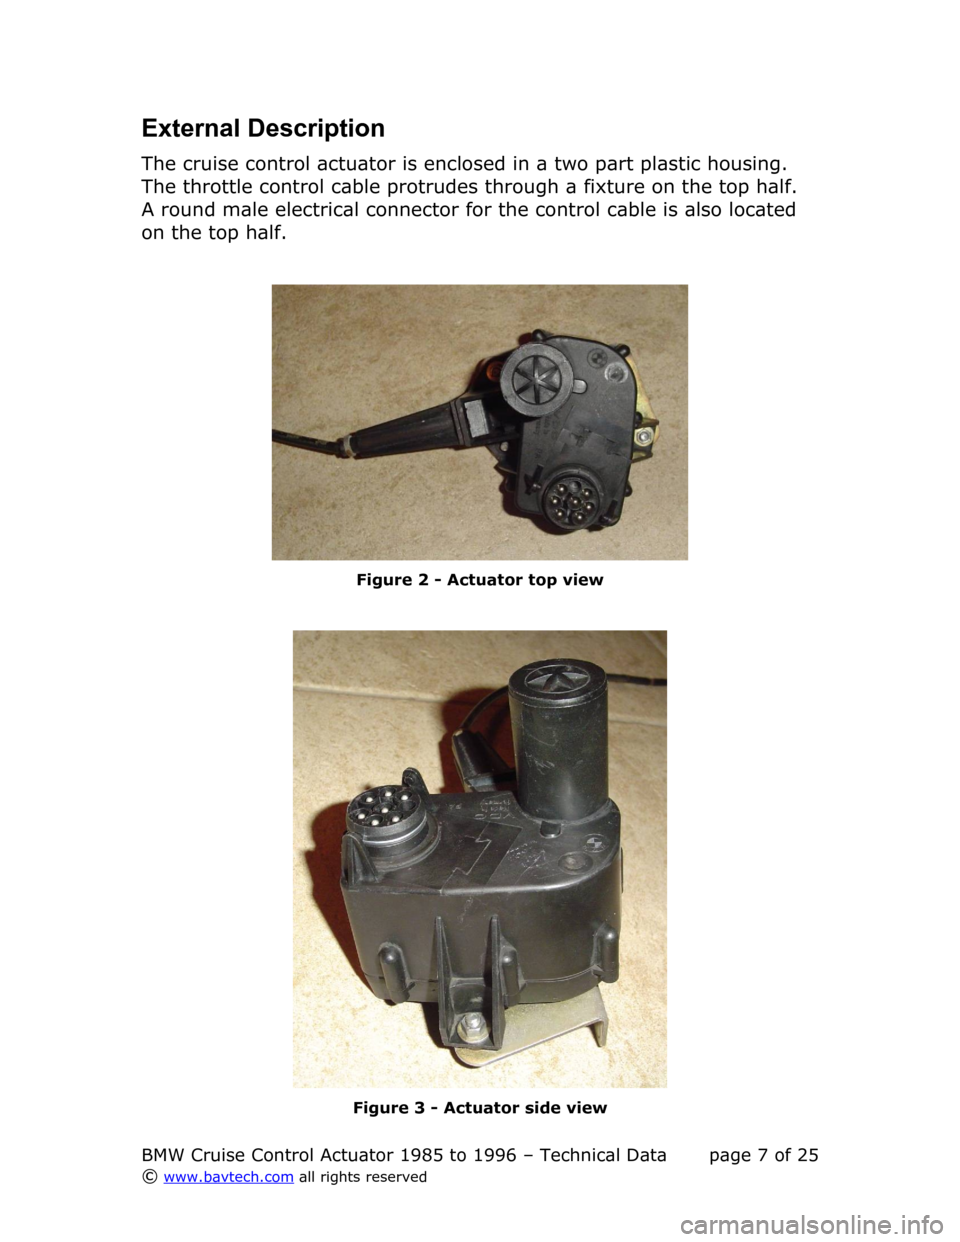 BMW 5 SERIES 1991 E34 Cruise Control Acutator External Description
The cruise control actuator is enclosed in a two part plastic housing.  
The throttle control cable protrudes through a fixture on the top half.  
A round male electrical connecto